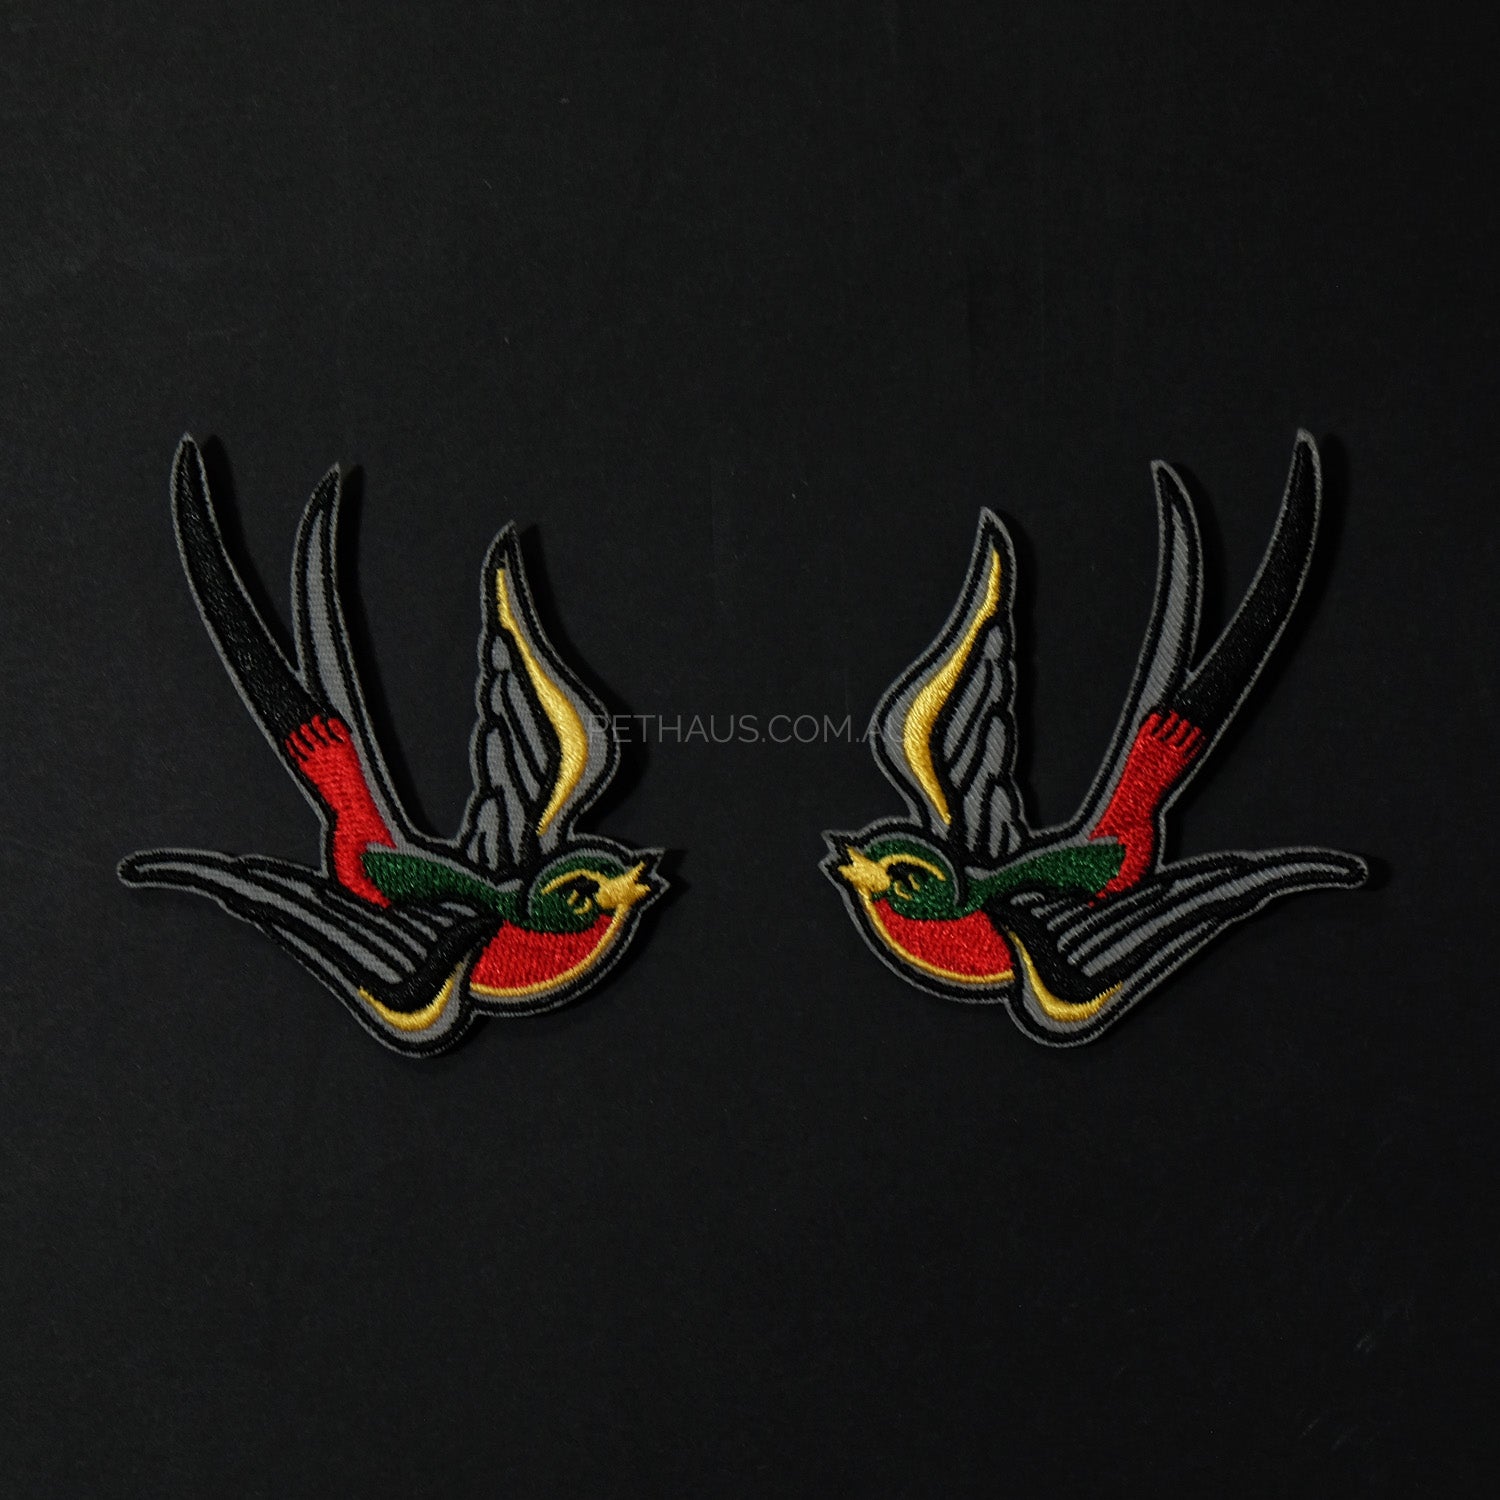 swallows embroided patch, tattoo style patches, dog patches, bird patch